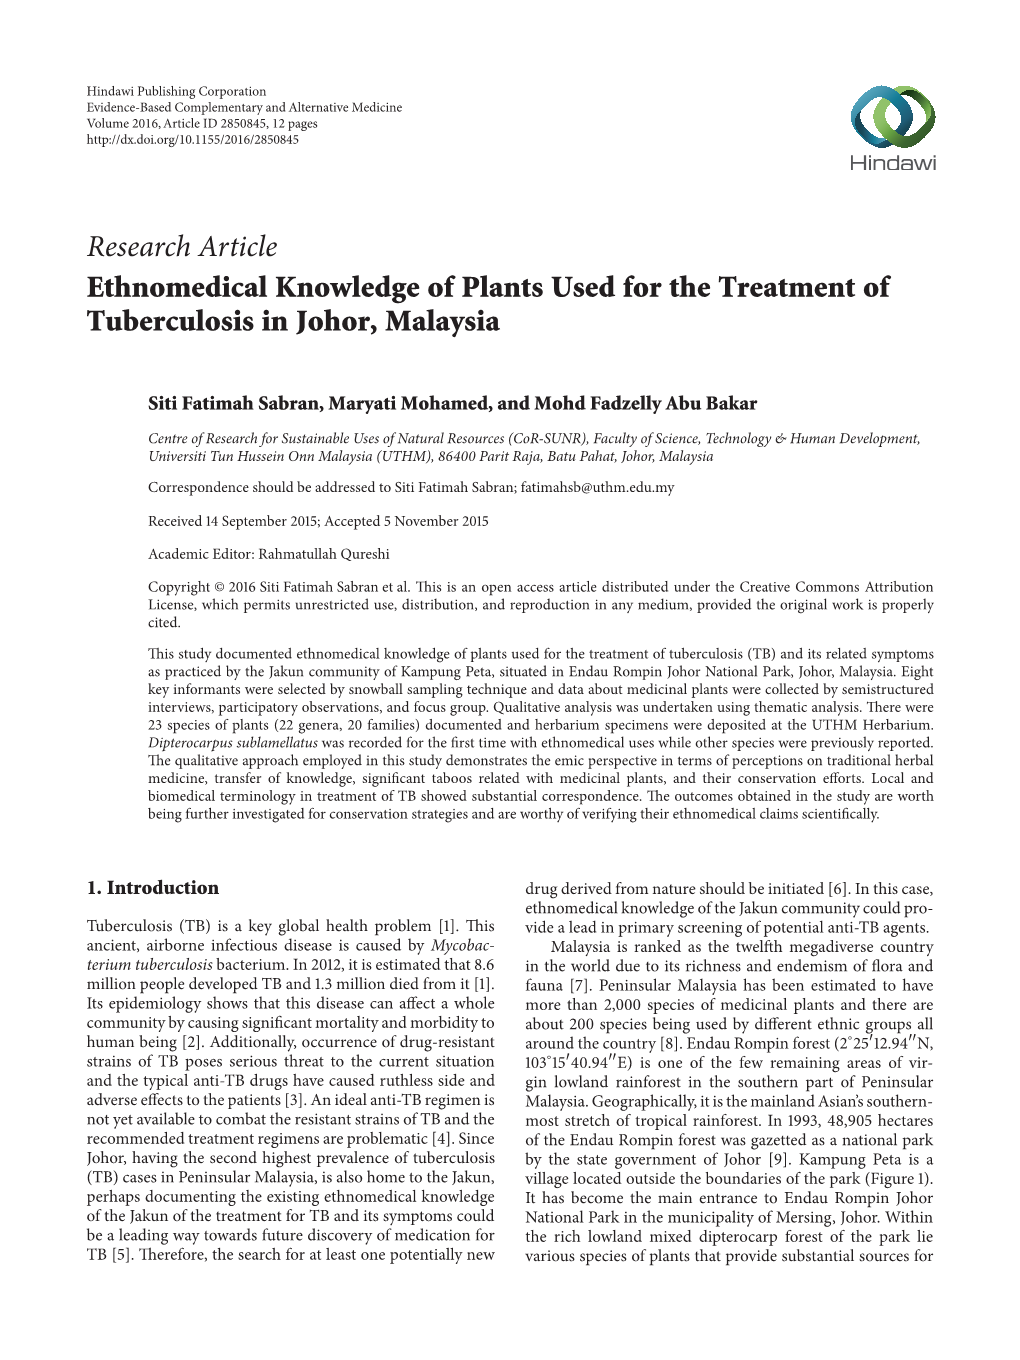 Research Article Ethnomedical Knowledge of Plants Used for the Treatment of Tuberculosis in Johor, Malaysia